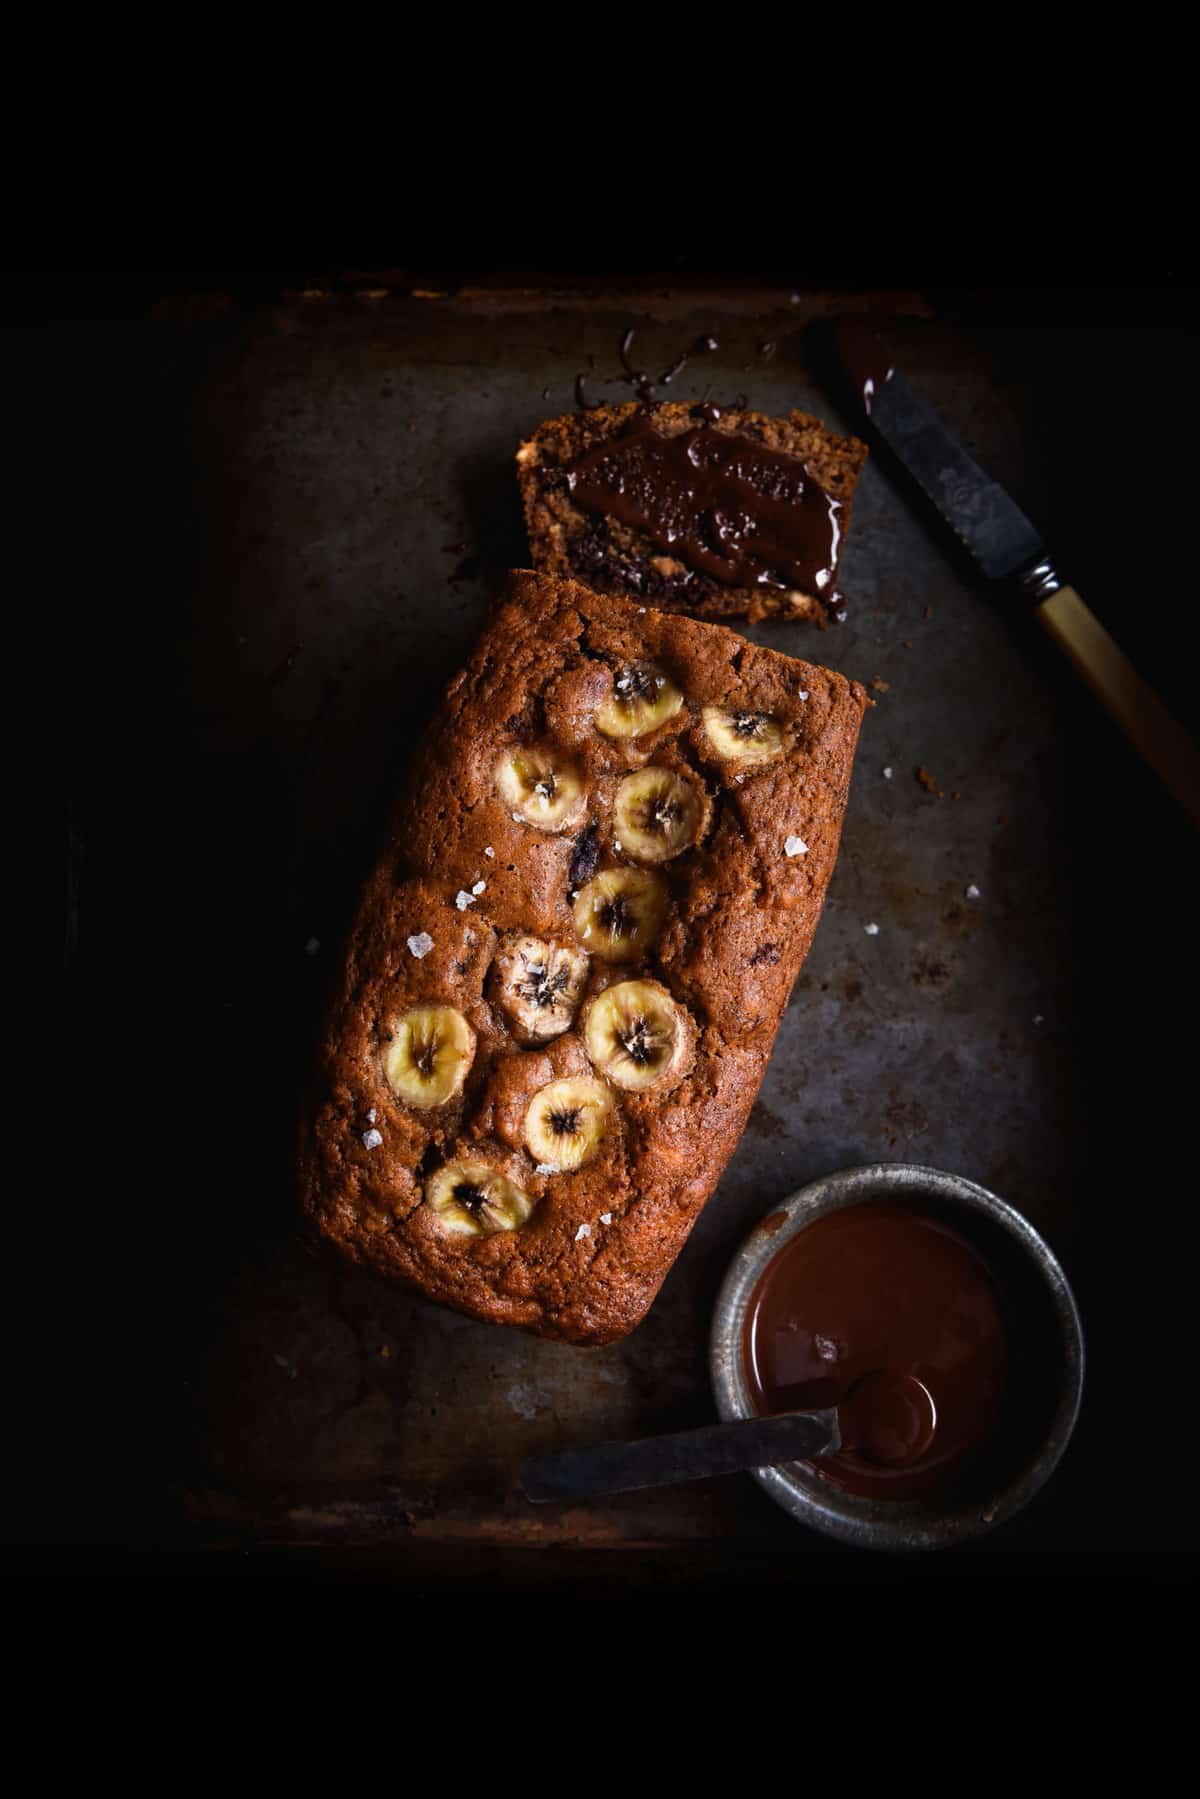 A moody aerial image of a loaf of gluten free banana bread on a dark steel backdrop. The loaf is golden brown and topped with banana coins. A slice of the bread has been smeared with chocolate spread, a bowl of which sits to the bottom right of the image.